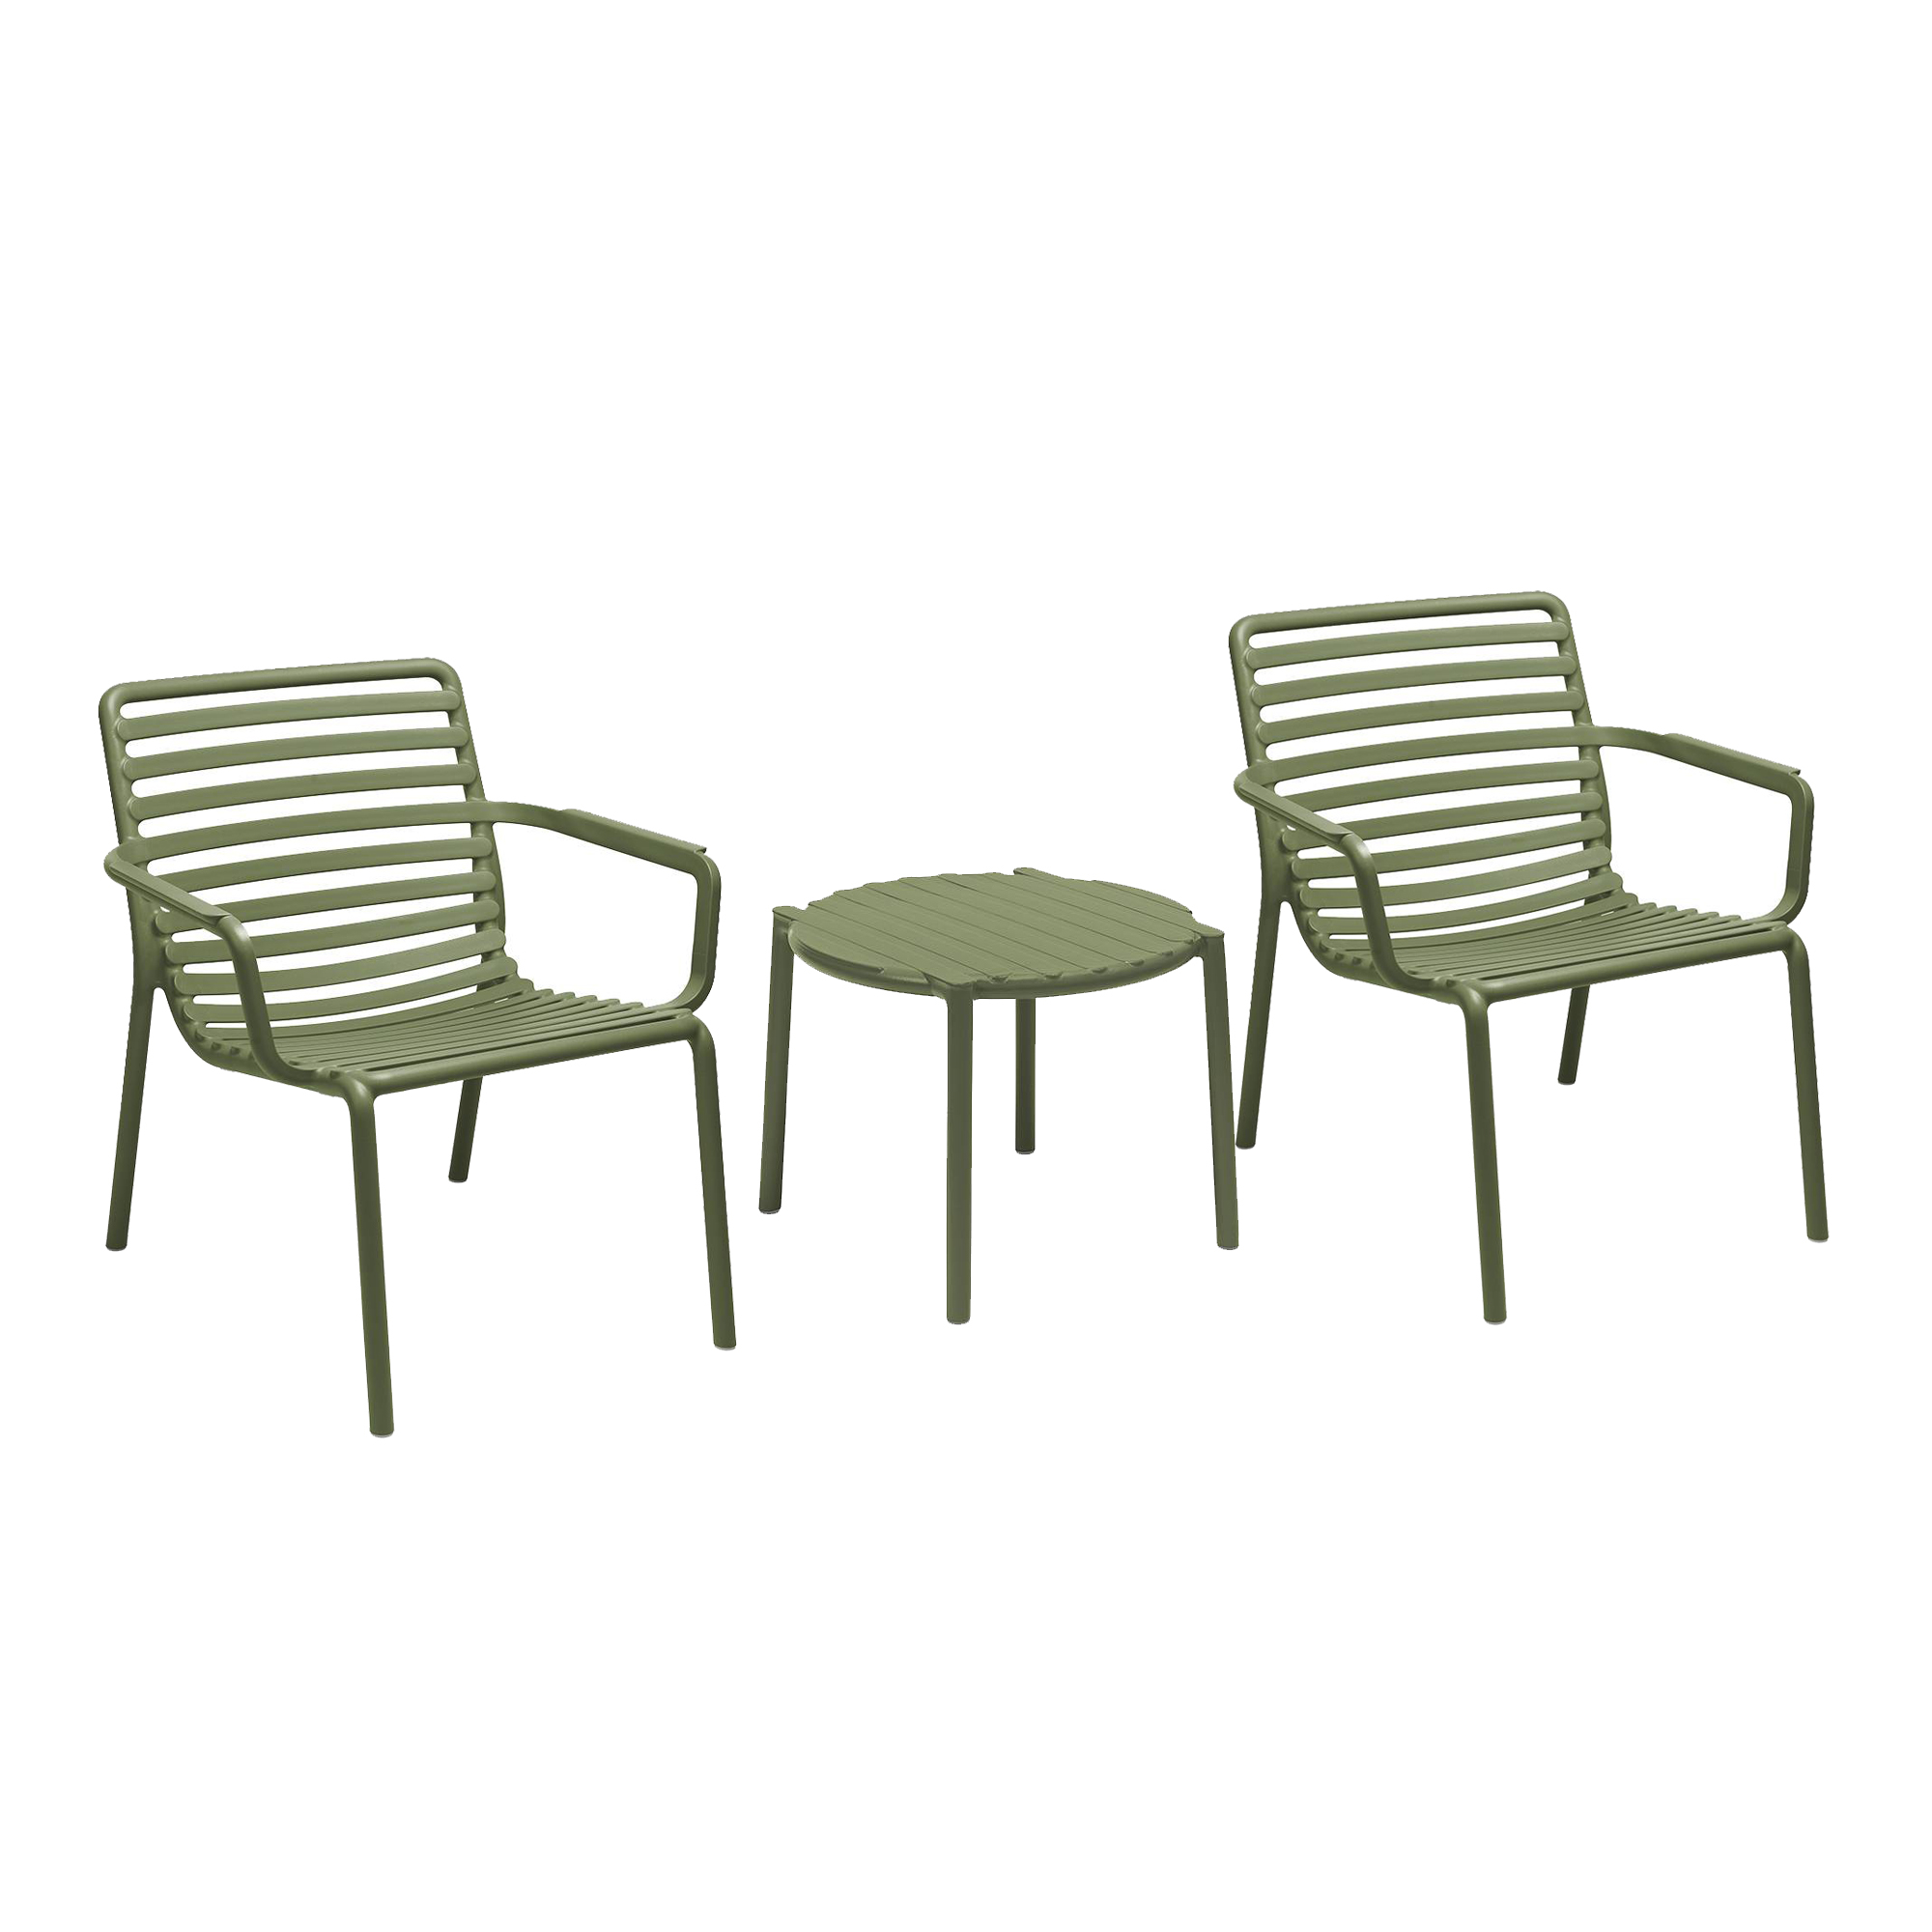 Lima Table with 2 Cassis Chairs, Round, Green | Barker & Stonehouse